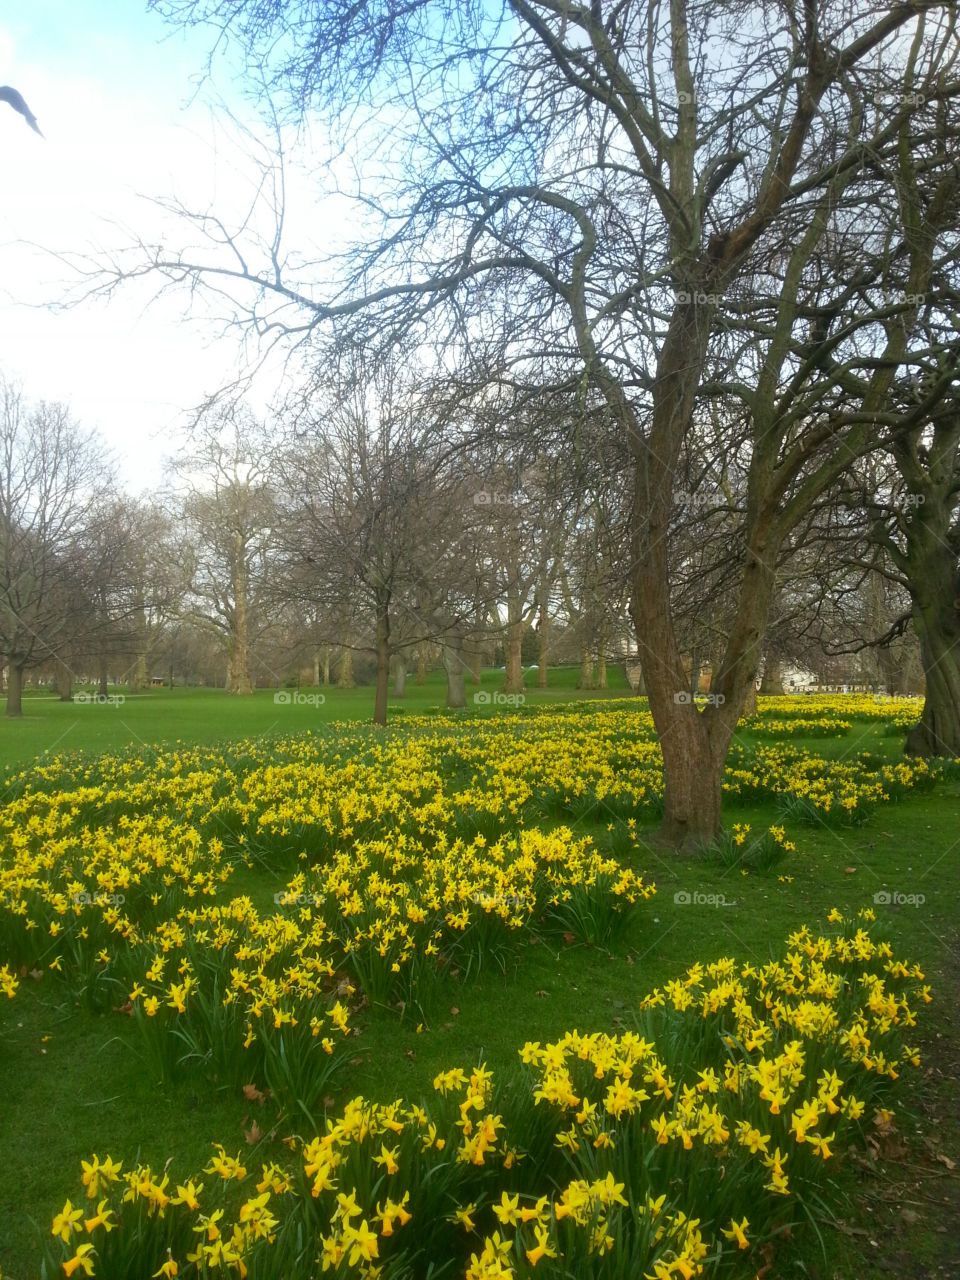 Daffodils in St.James's Park, London